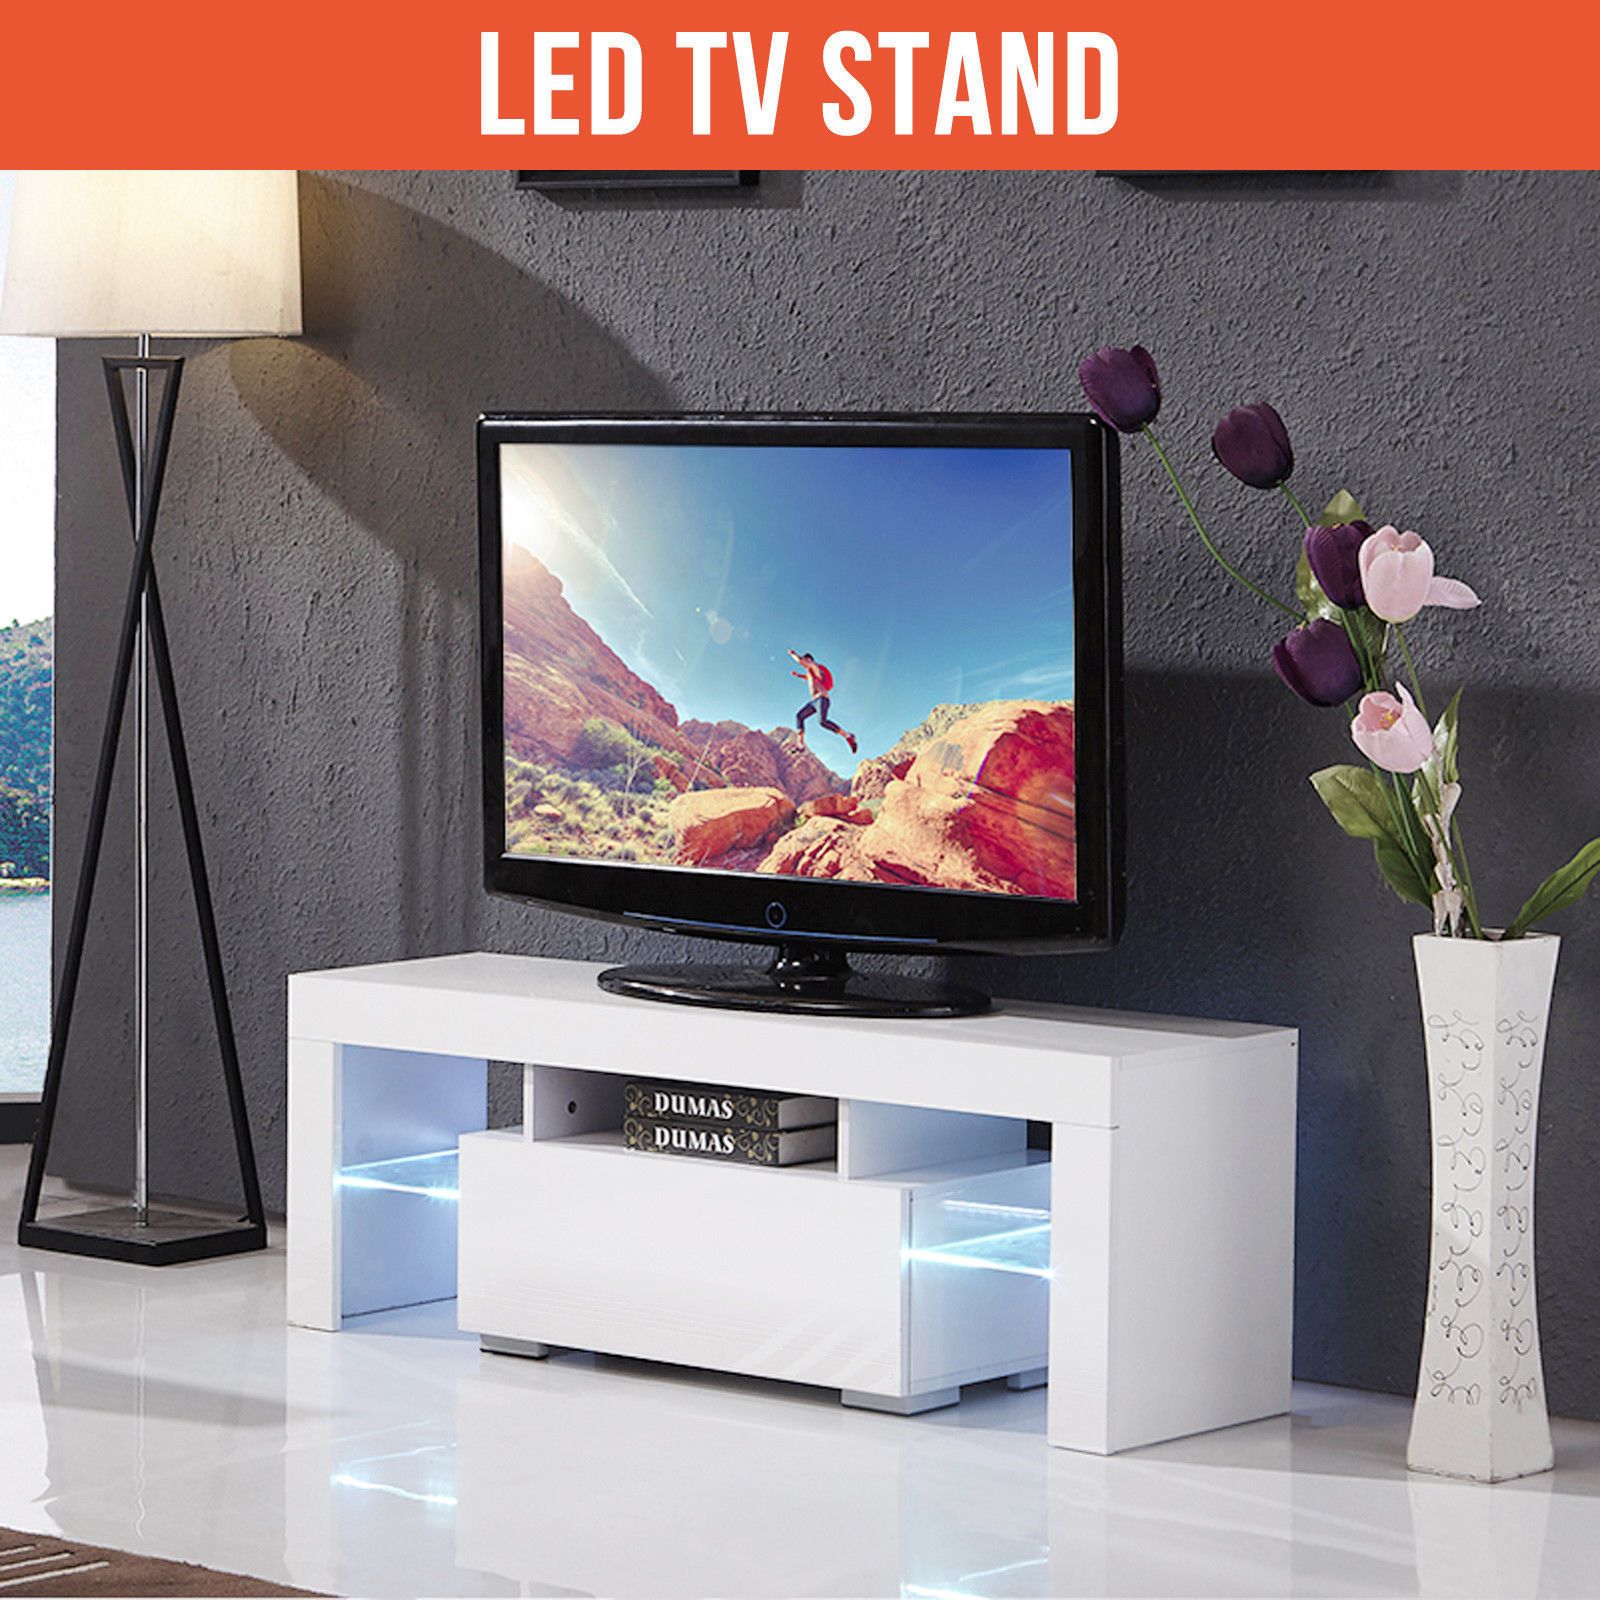 Ktaxon Modern Led Tv Unit Cabinet Stand Shelf Table Free With Regard To Led Tv Stands (View 3 of 15)